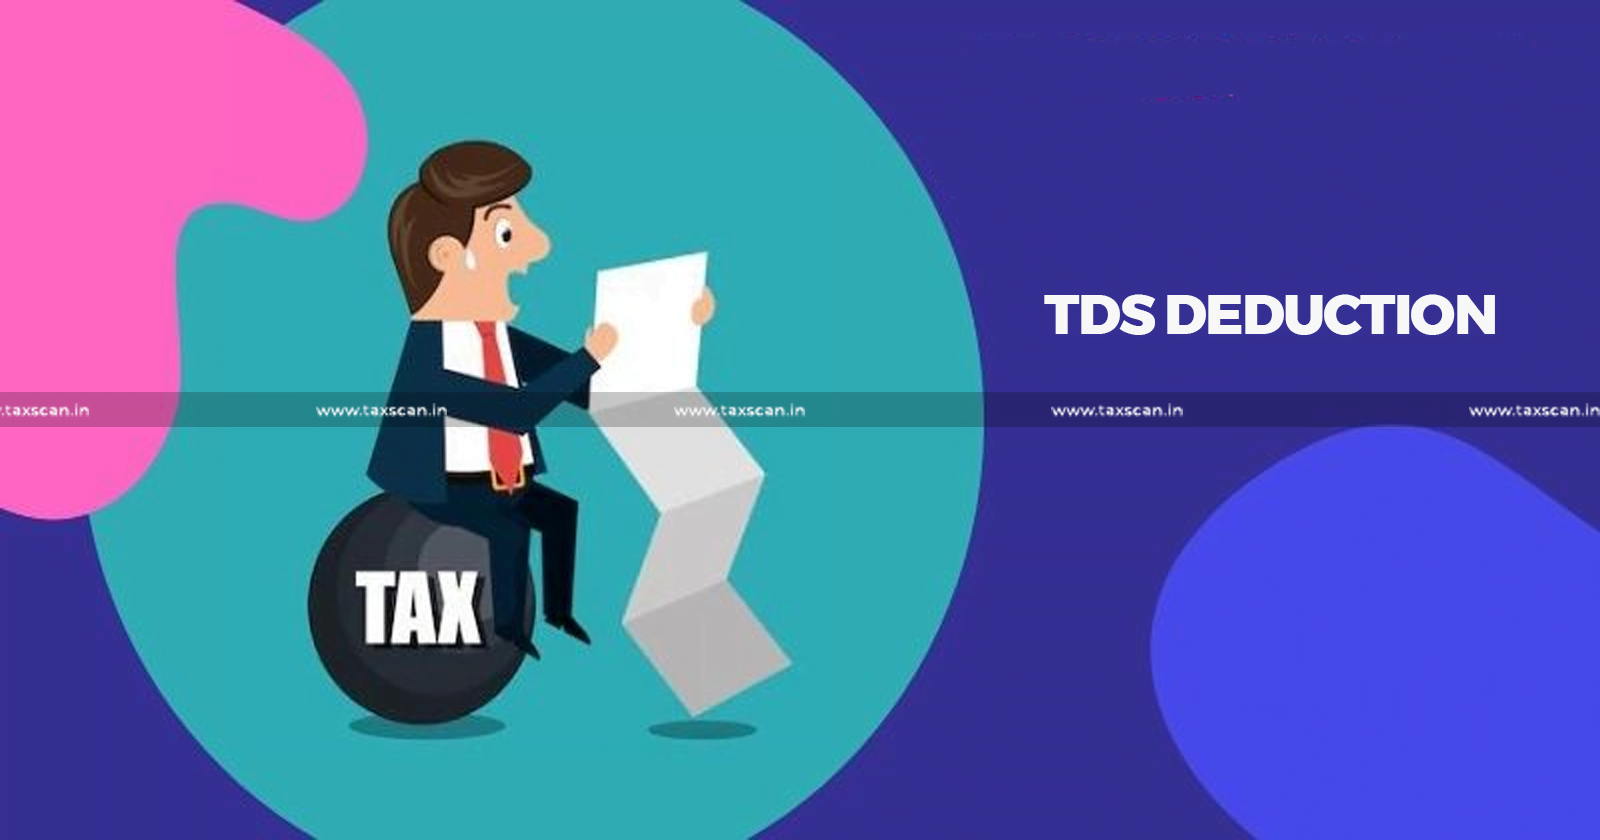 Delhi High Court - TDS - Deduction of TDS - Income Tax - NGO - taxscan